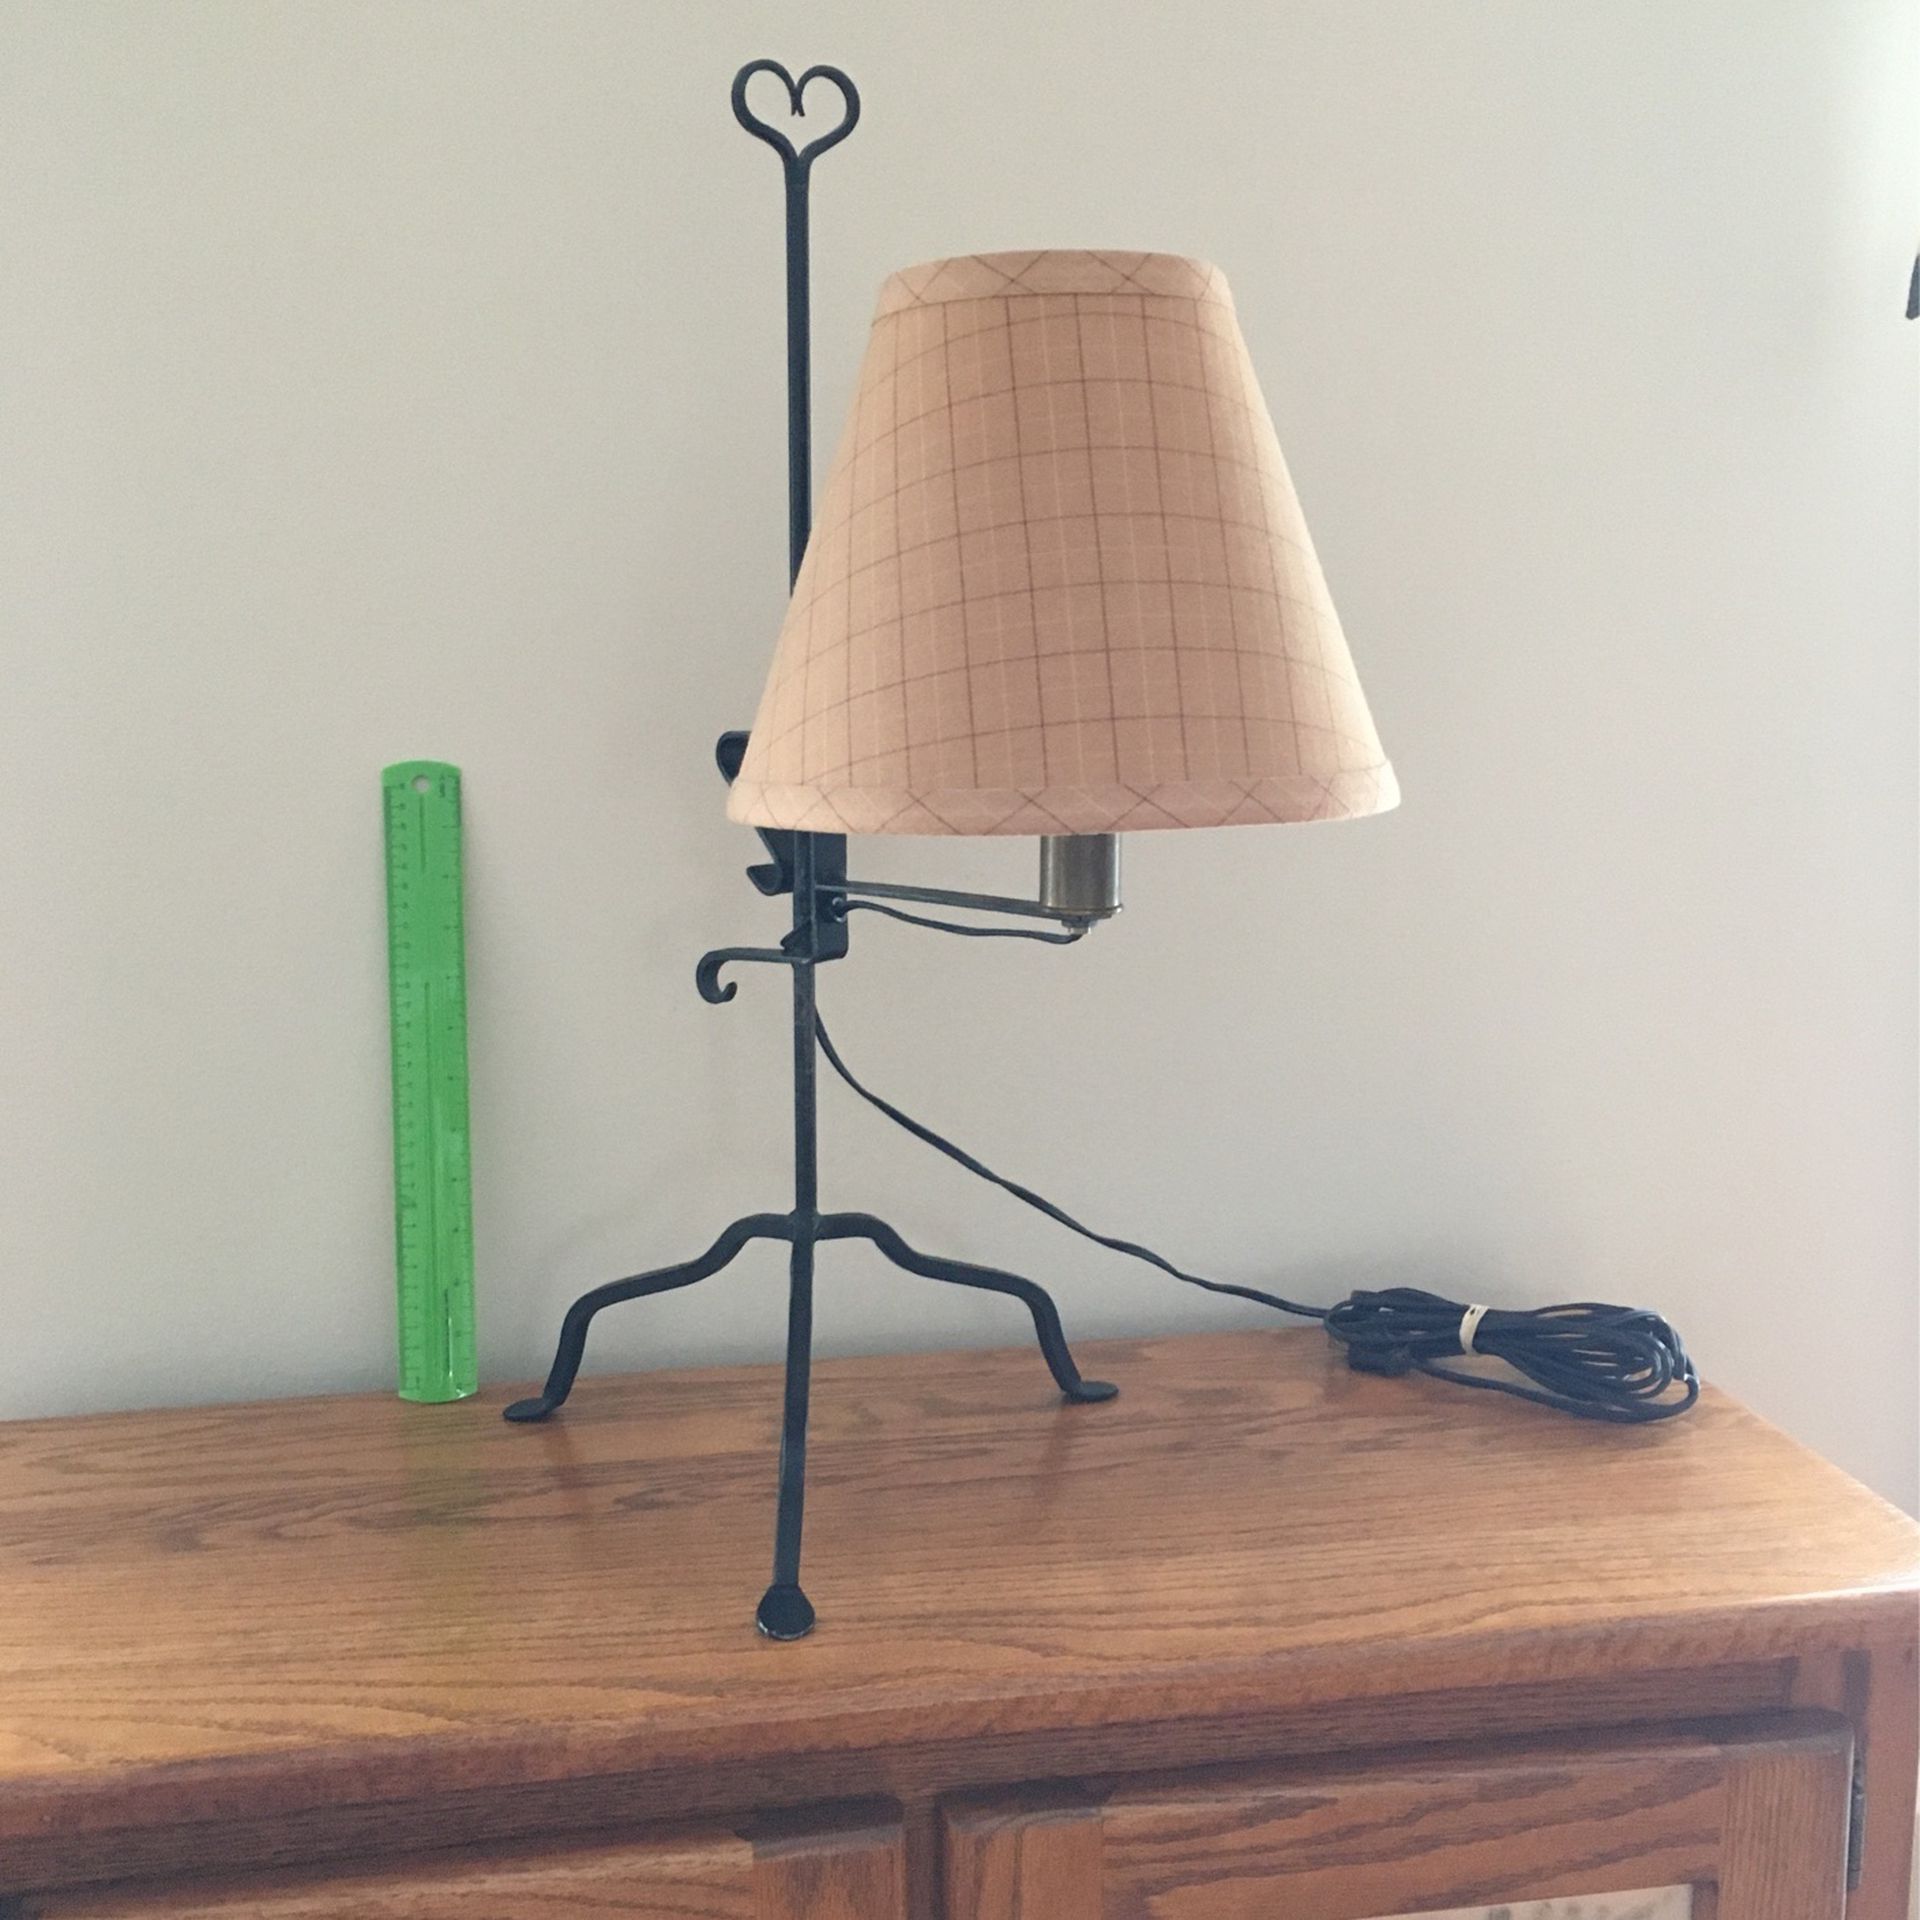 Adjustable Height Table Or Desk Lamp With Shade